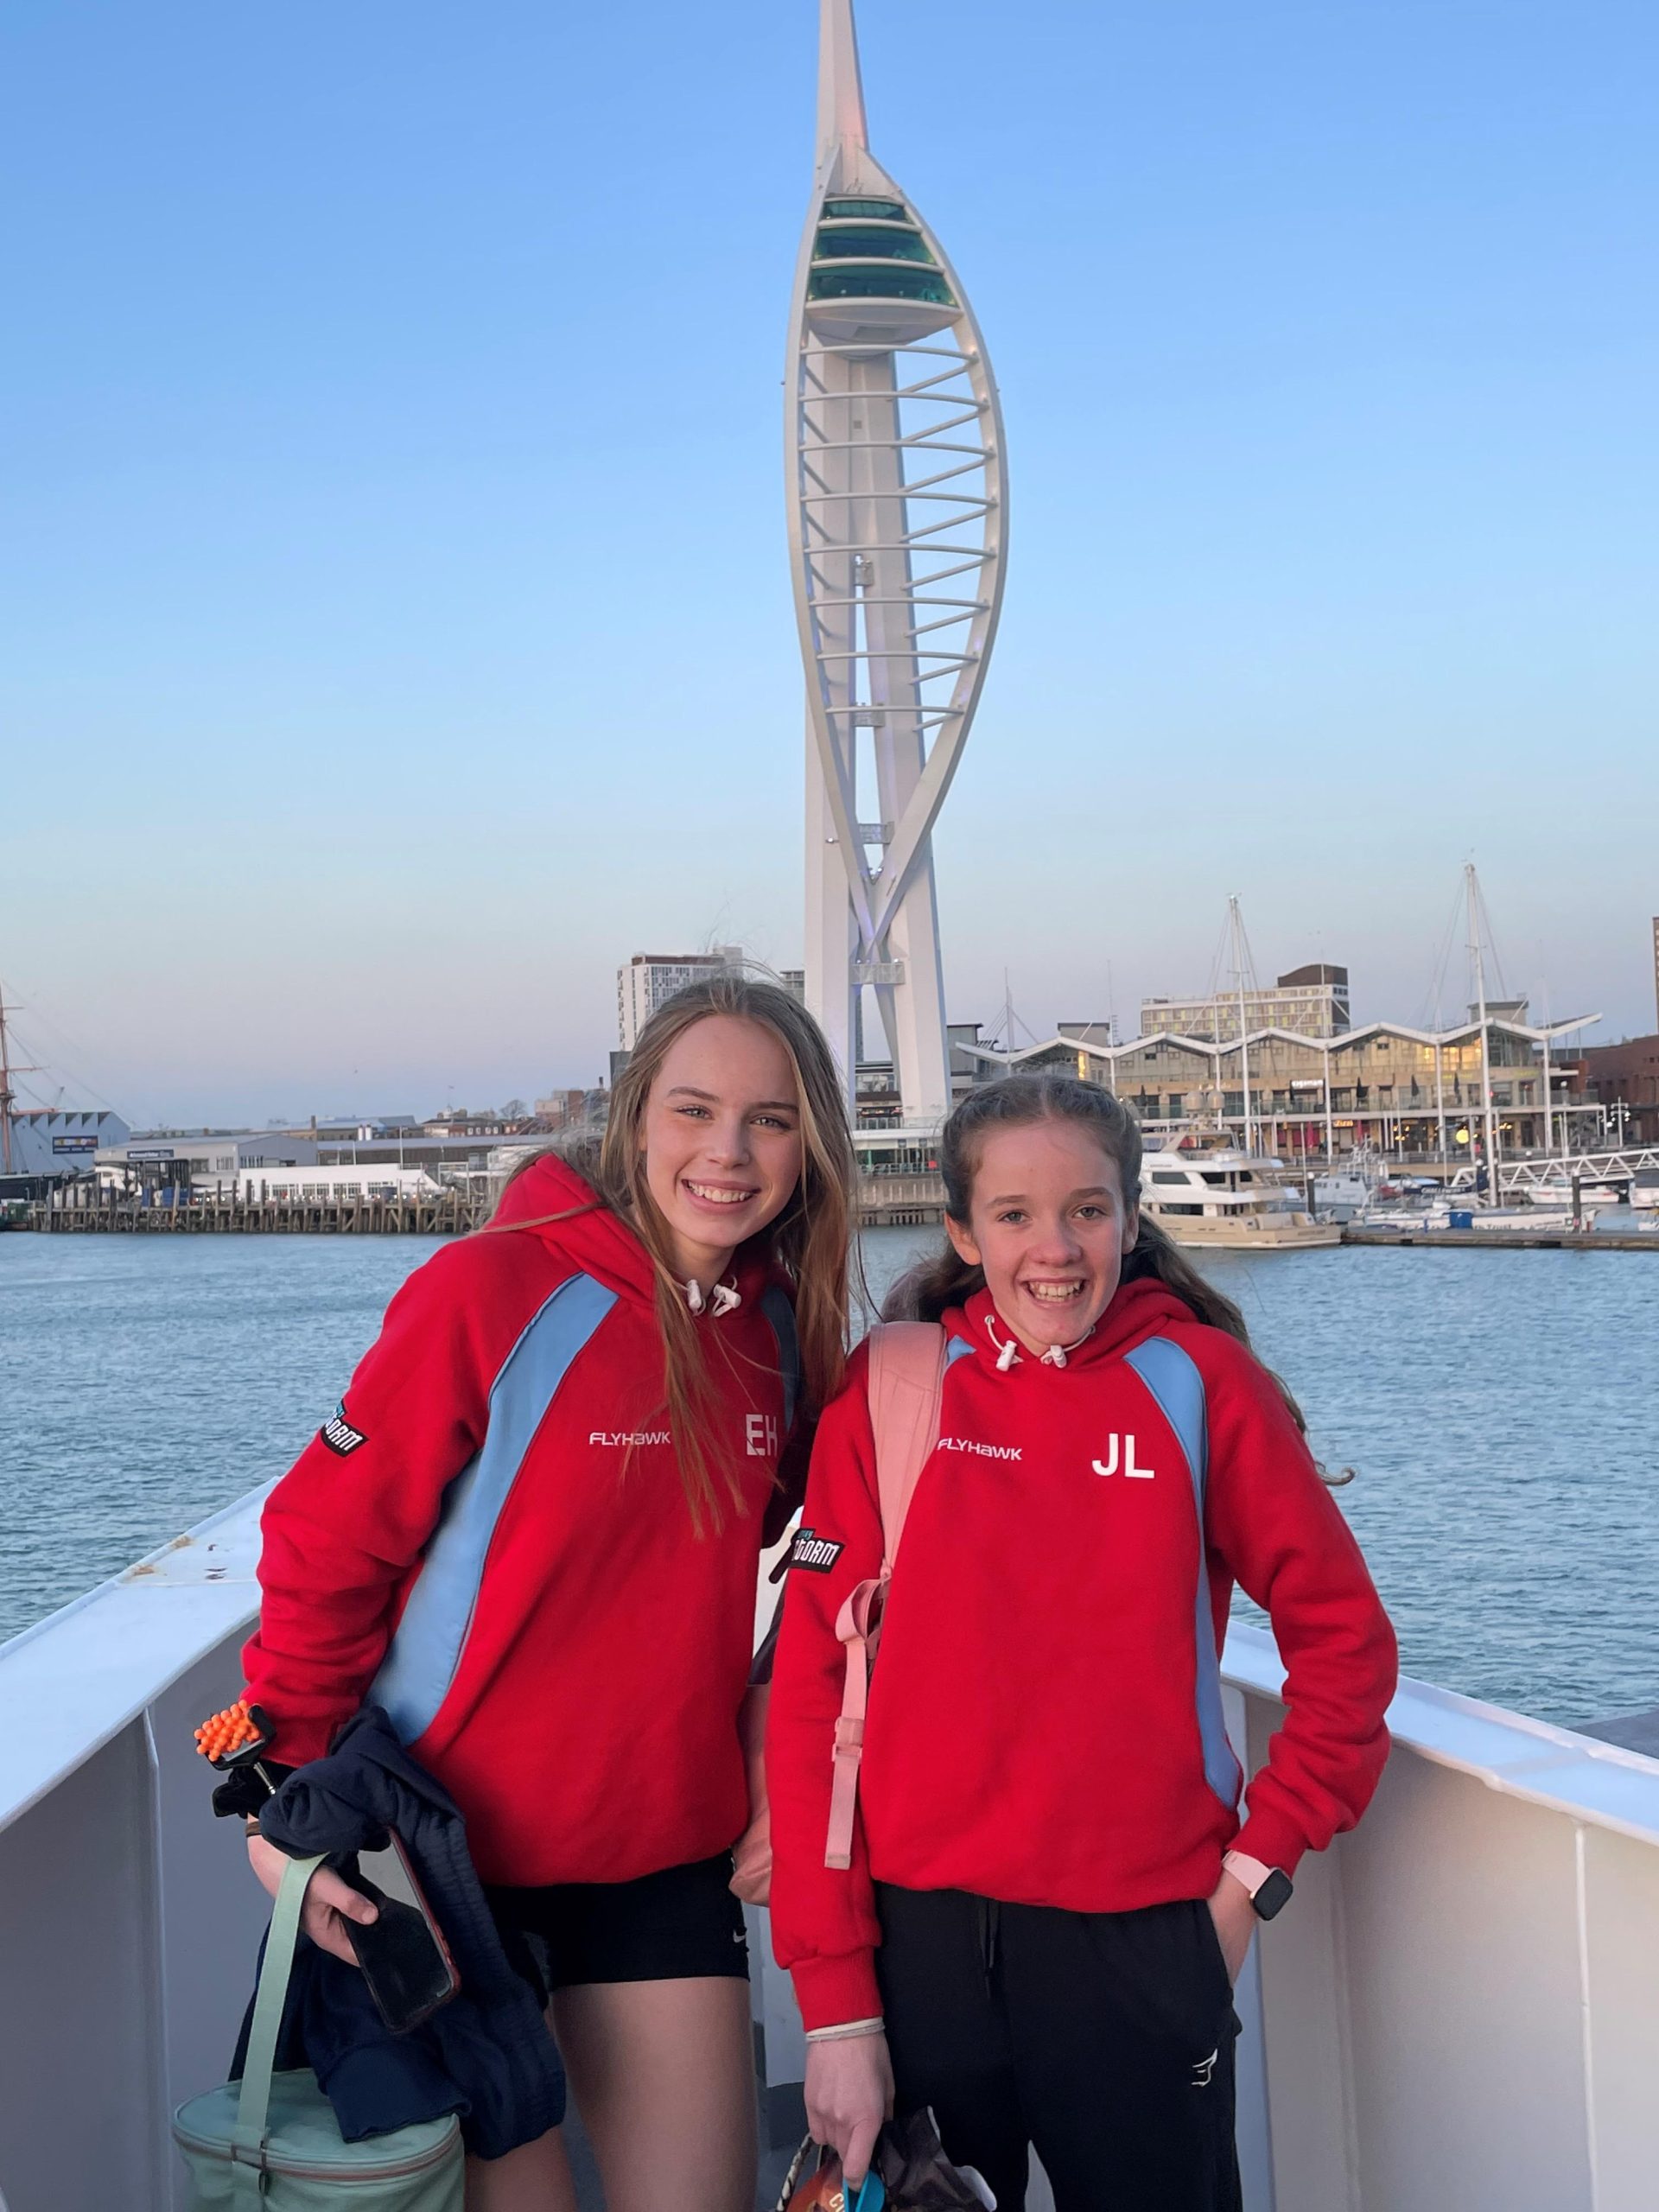 Ella and Jessica netball players on a Wightlink ferry with the Spinnaker Tower in the background